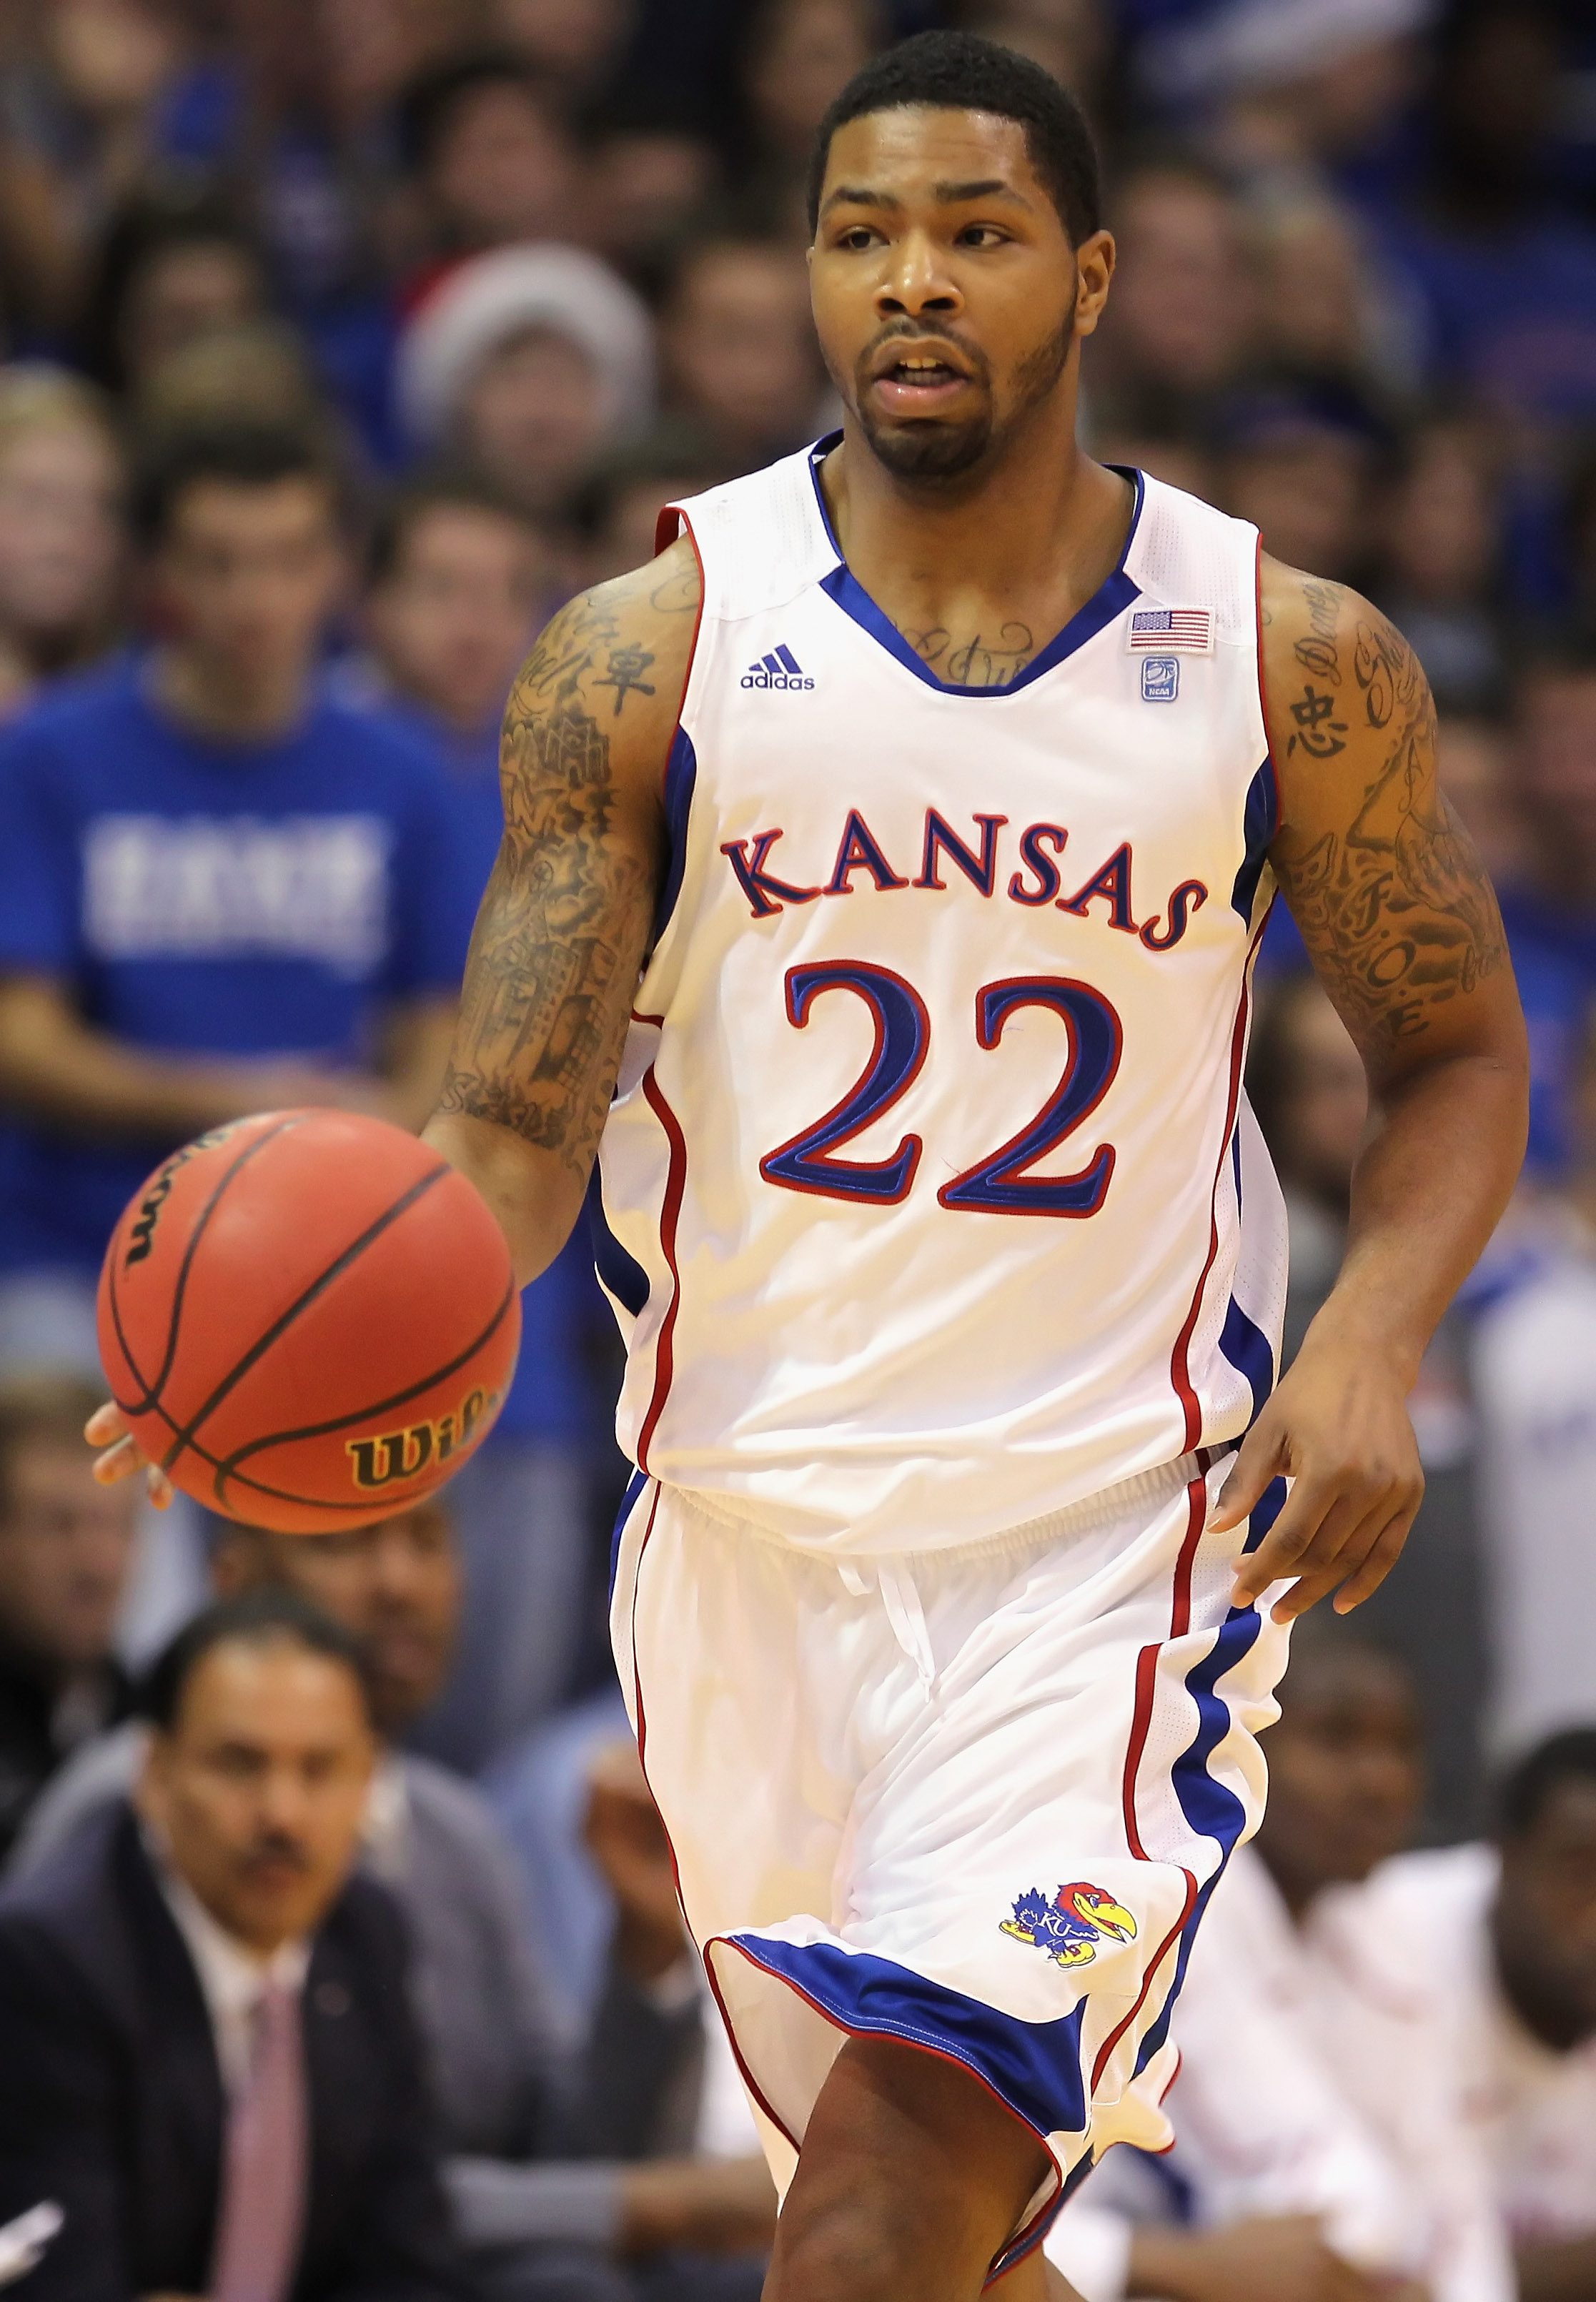 LAWRENCE, KS - DECEMBER 18:  Marcus Morris #22 of the Kansas Jayhawks in action during the game against the USC Trojans on December 18, 2010 at Allen Fieldhouse in Lawrence, Kansas.  (Photo by Jamie Squire/Getty Images)